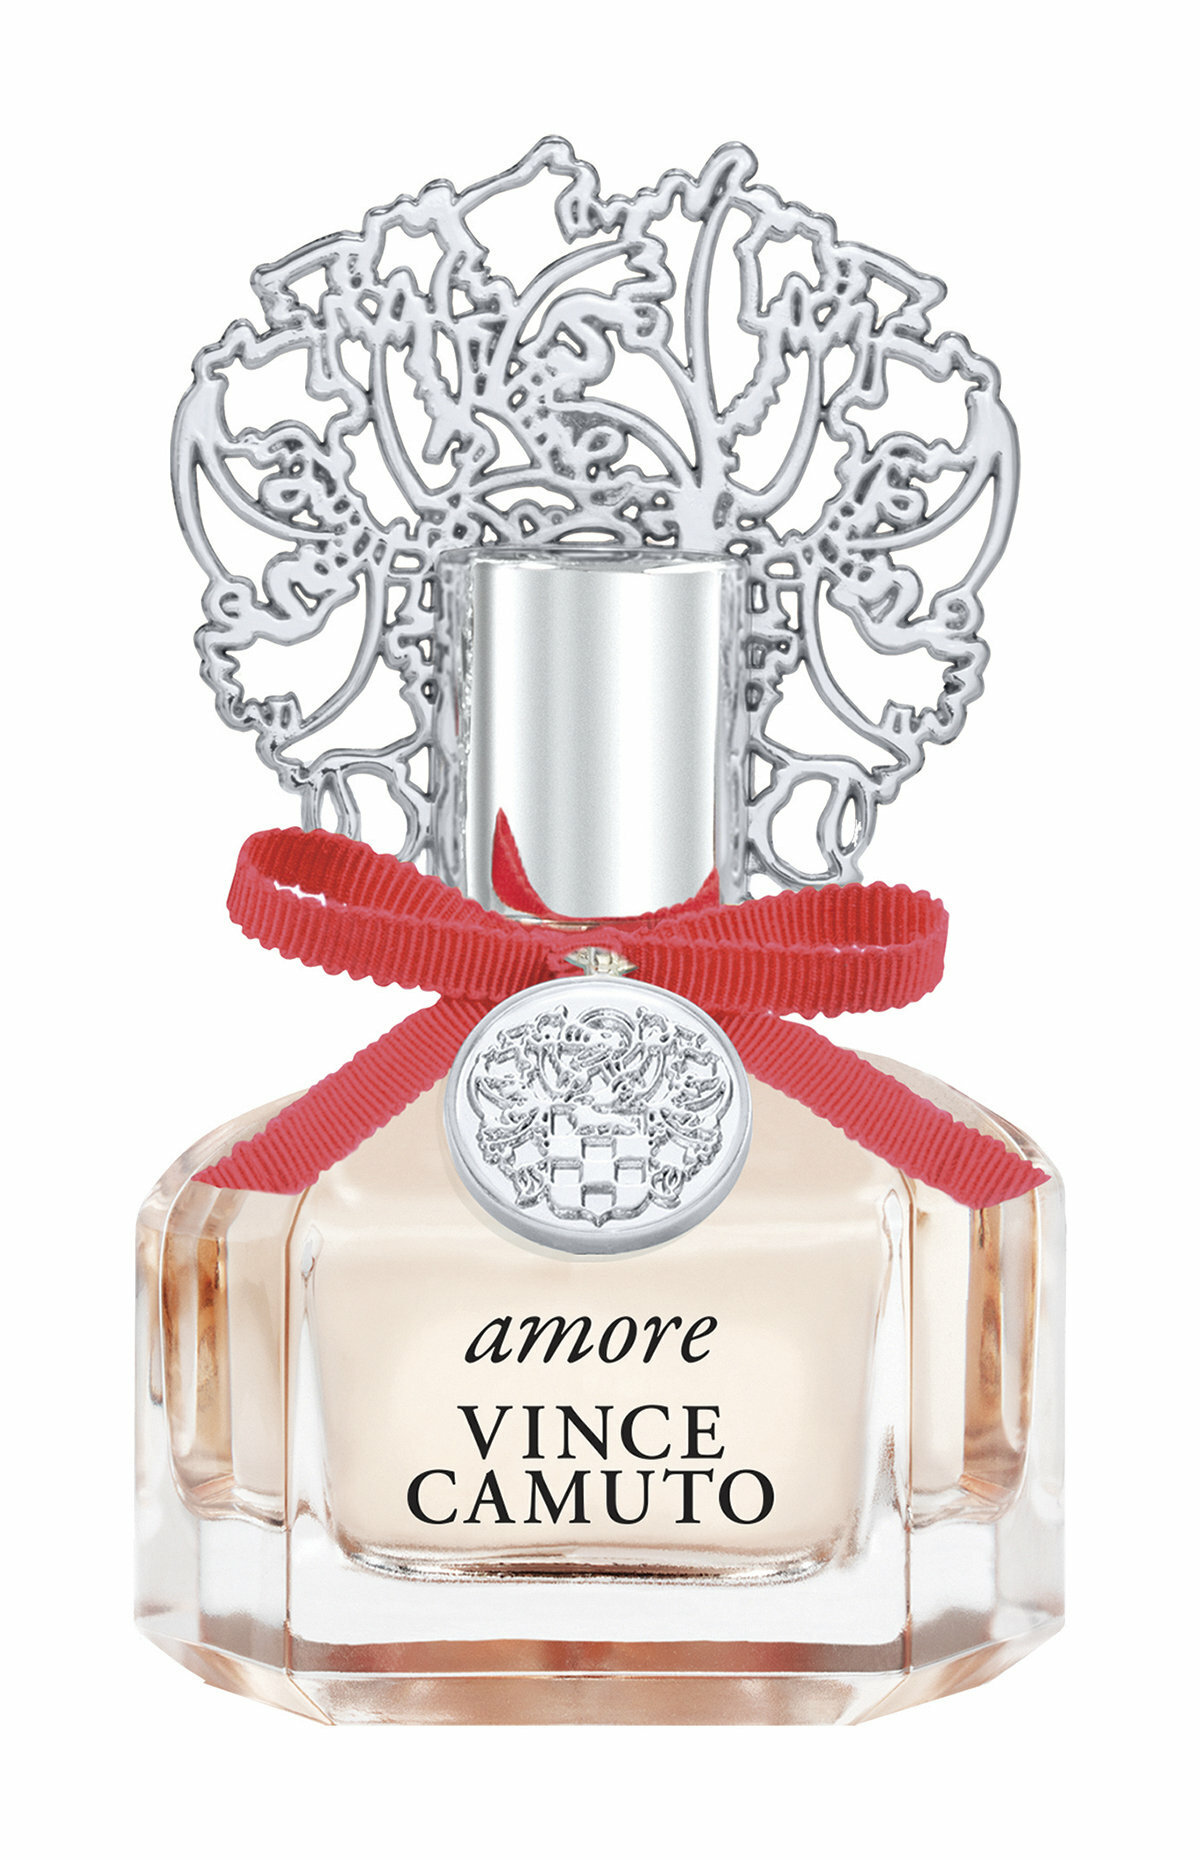 VINCE CAMUTO Amore Парфюмерная вода жен, 30 мл